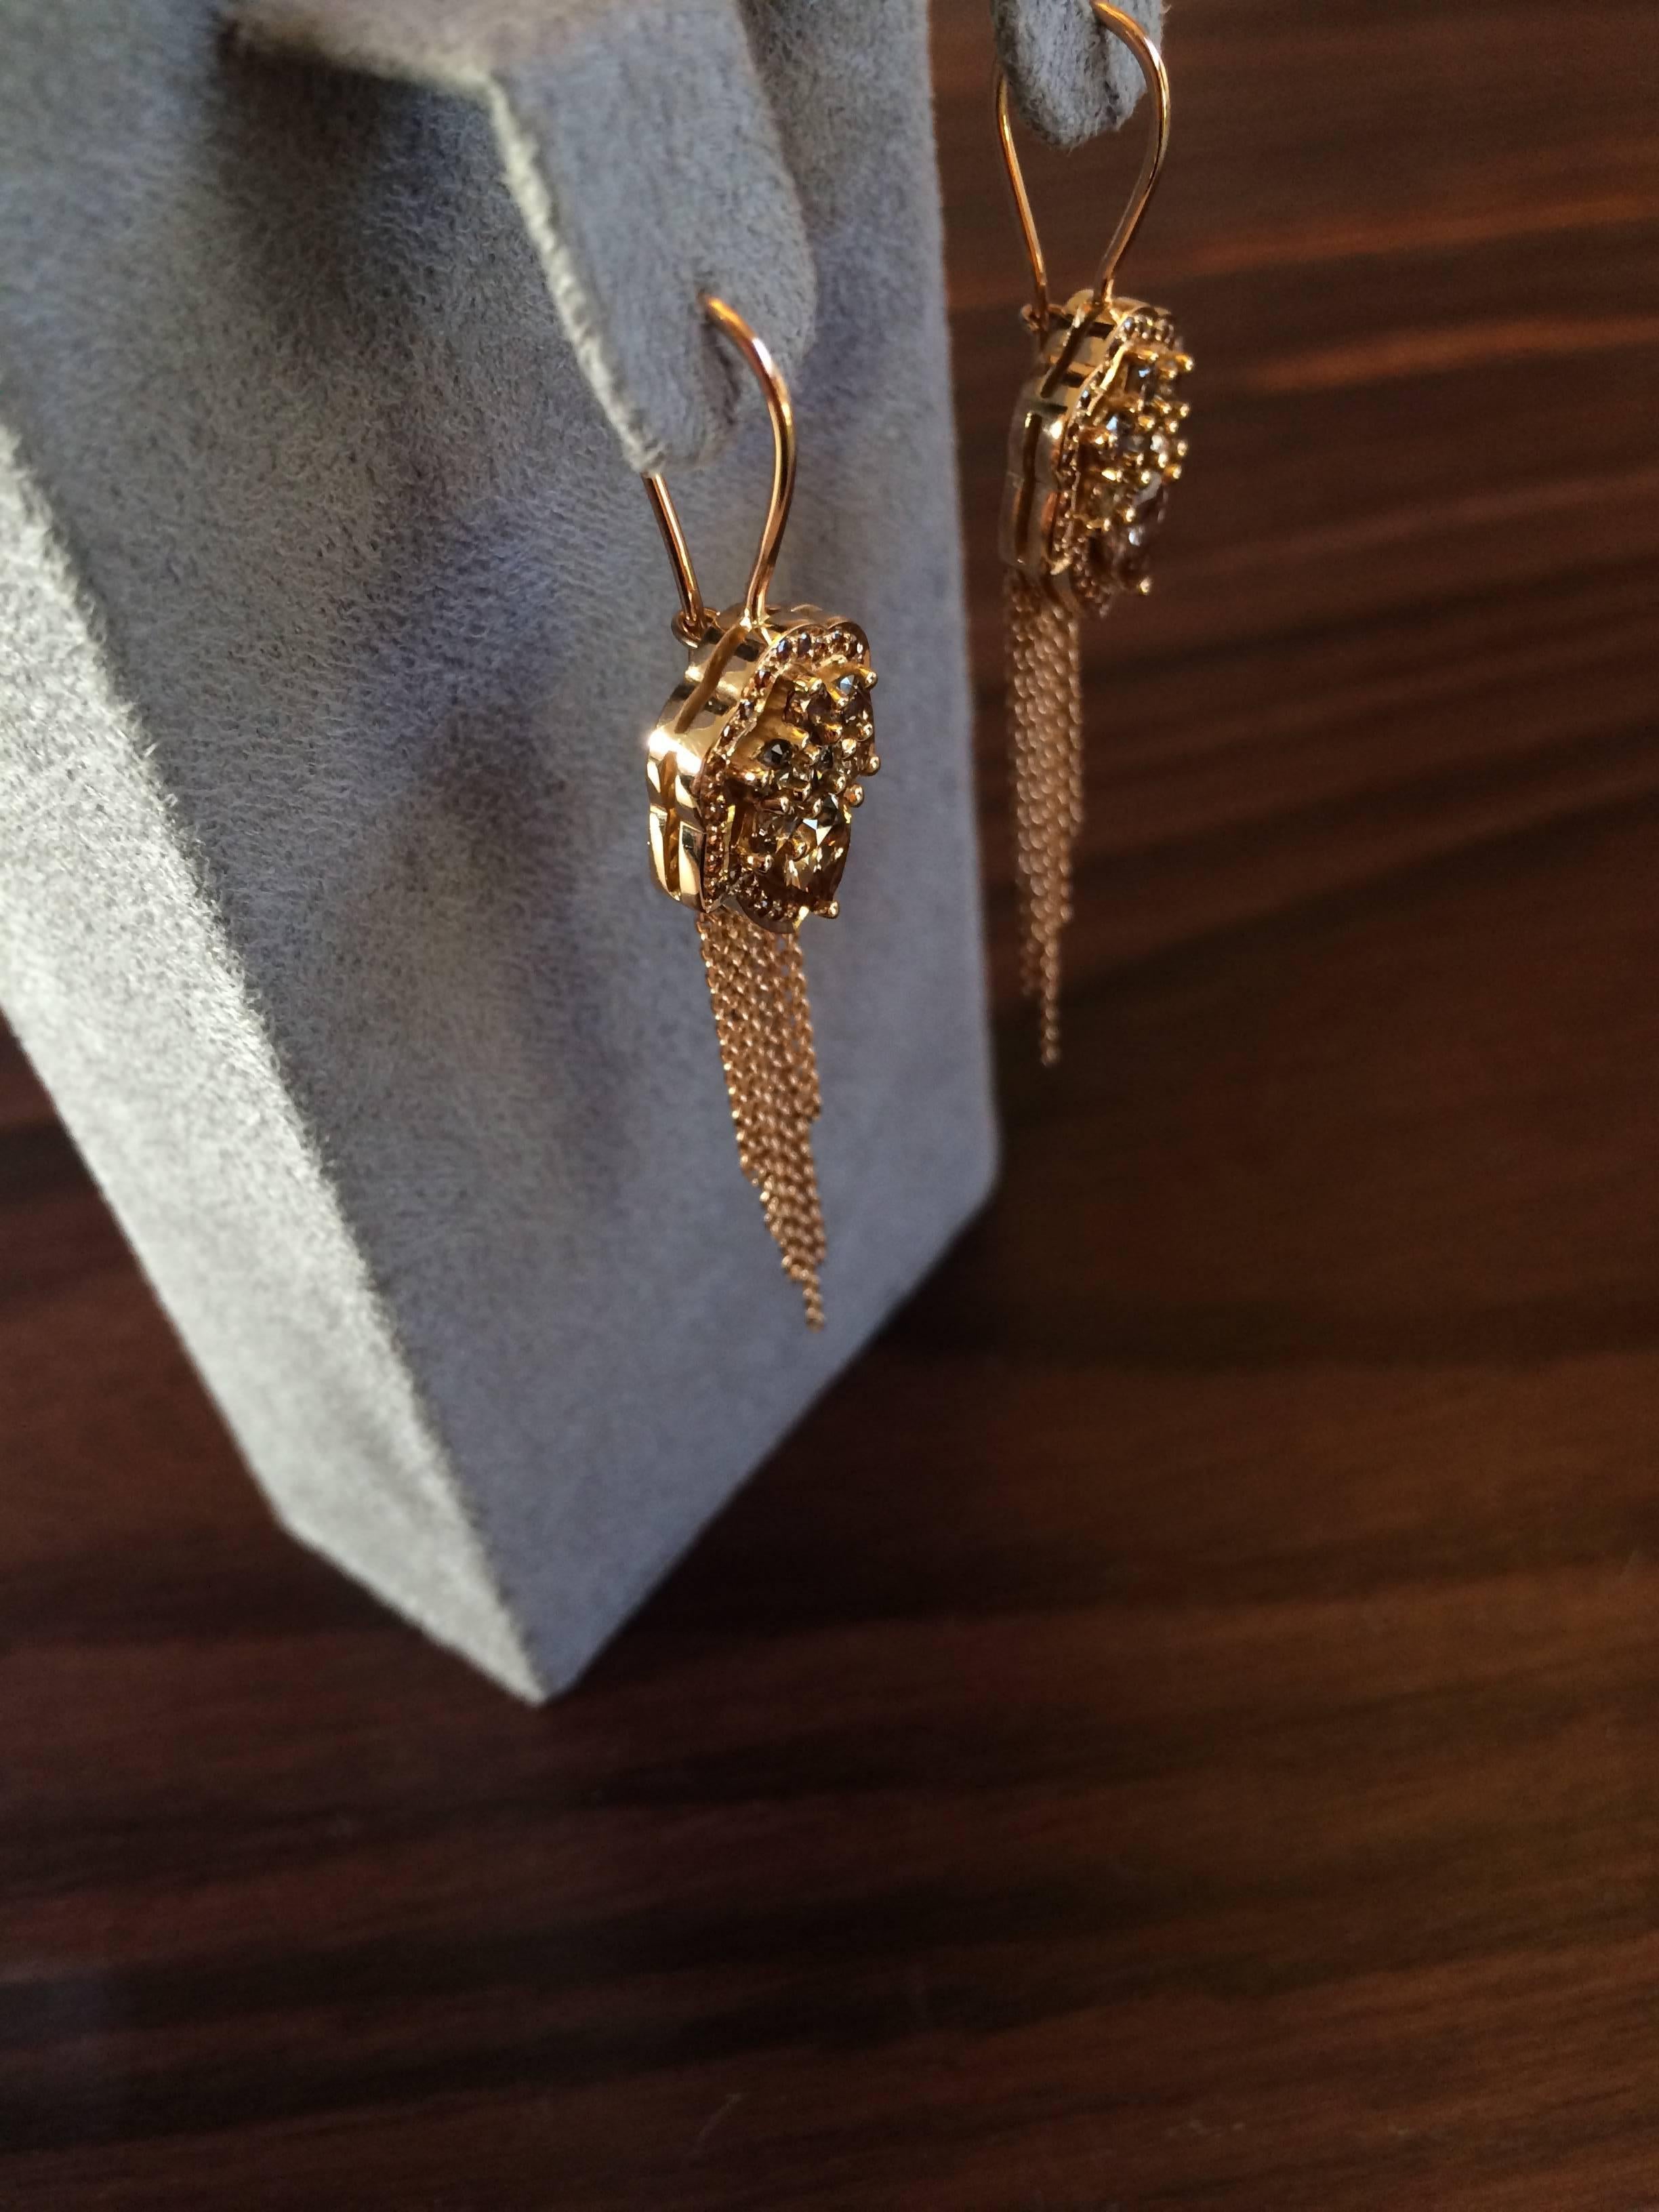 These earrings are hand crafted from 18ct rose gold and set with natural cognac diamonds which total 2.06ct. The chain tassels are diamond cut meaning that they sparkle in the light and move freely.

Diameter: 1.4cm
Length at longest point: